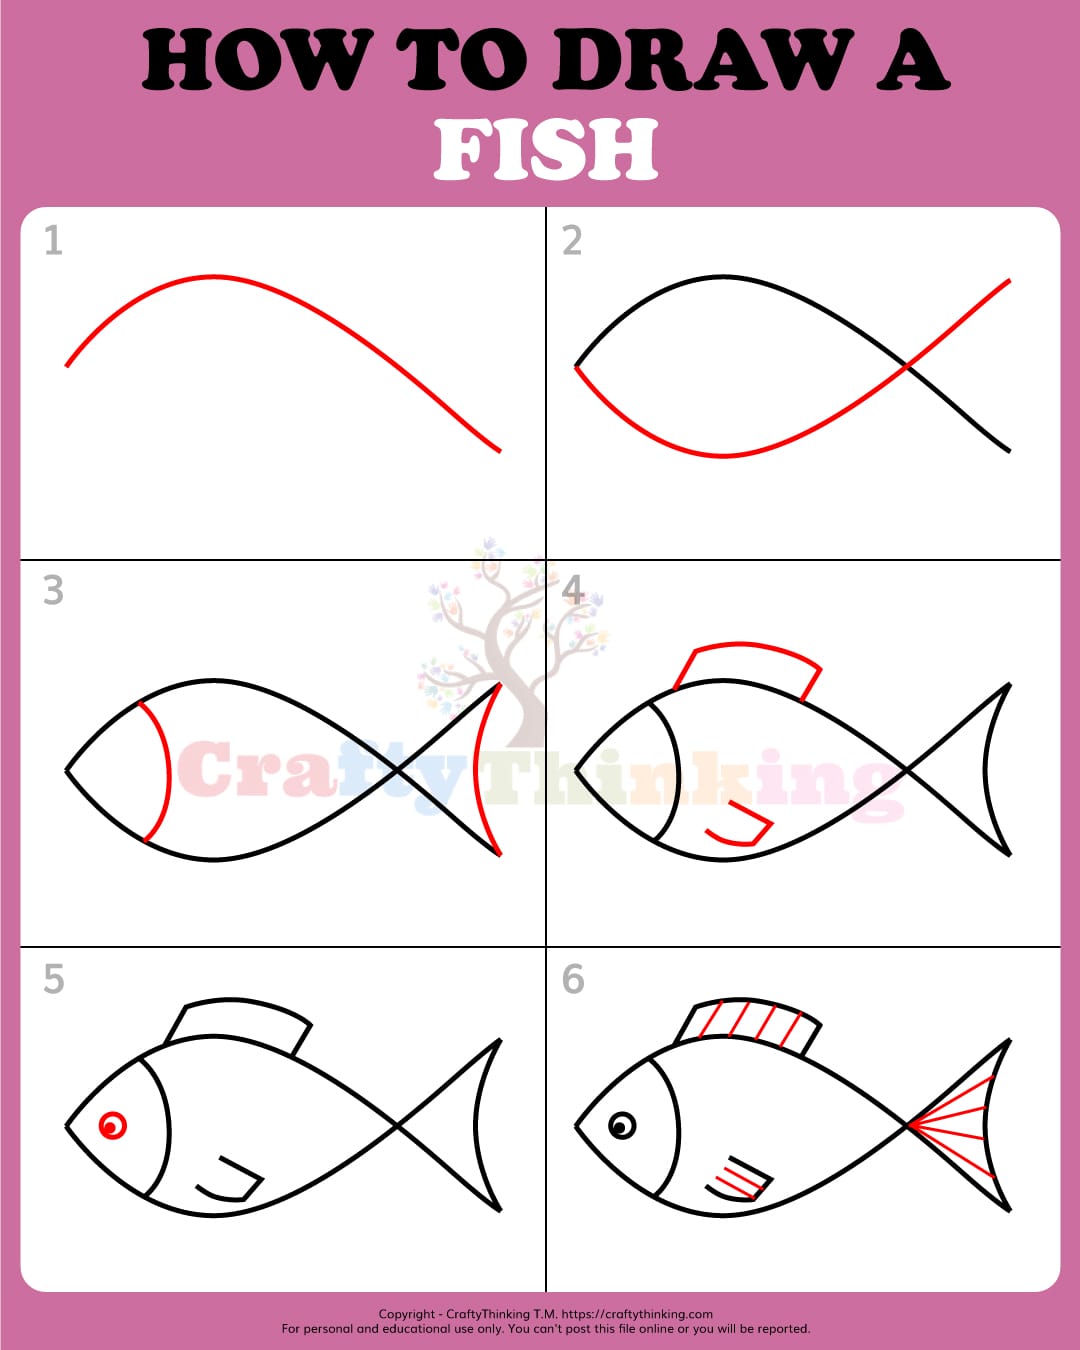 How To Draw A Fish: Easy Step-By-Step Tutorial For Kids | Easy drawings for  kids, Drawing for kids, Fish drawing for kids